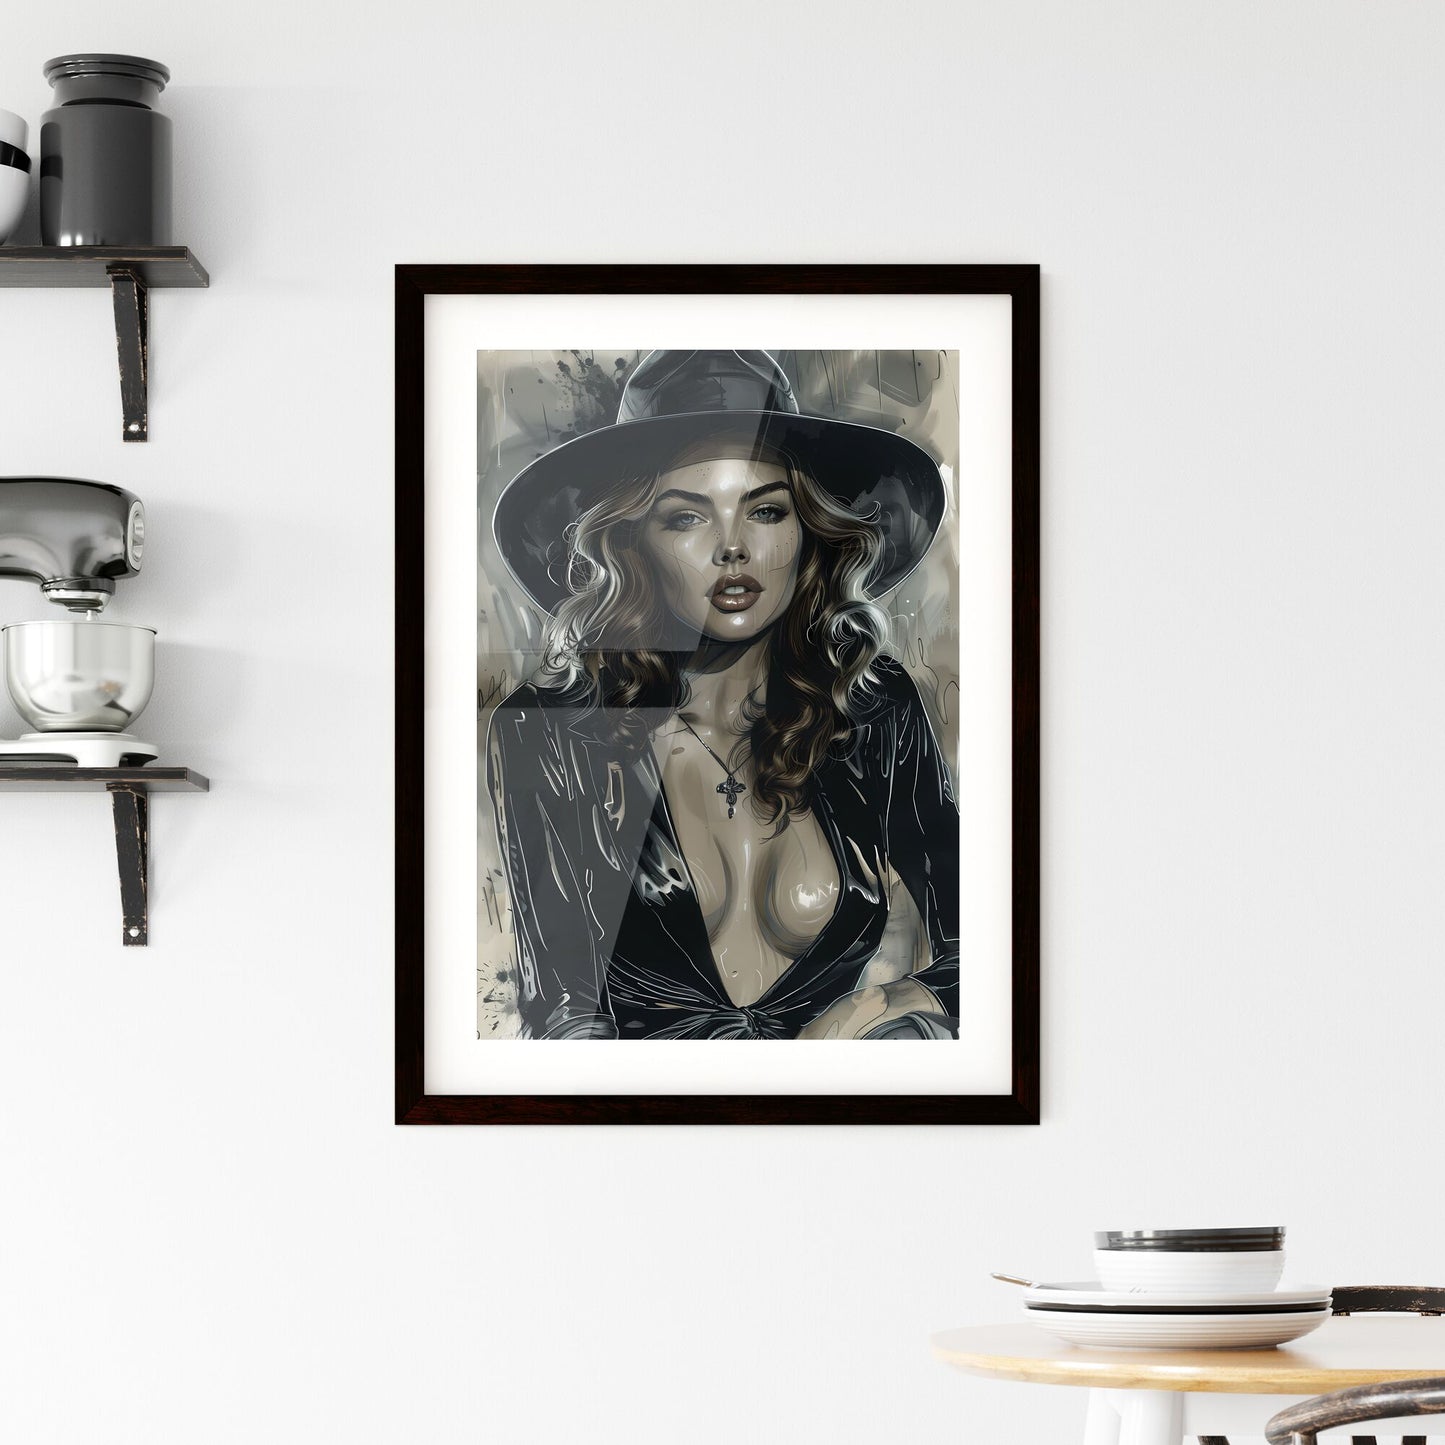 Monumental Noir Comic Art Painting of a Woman in a Hat, Dressed in Black and White, with Vibrant Colorization Default Title